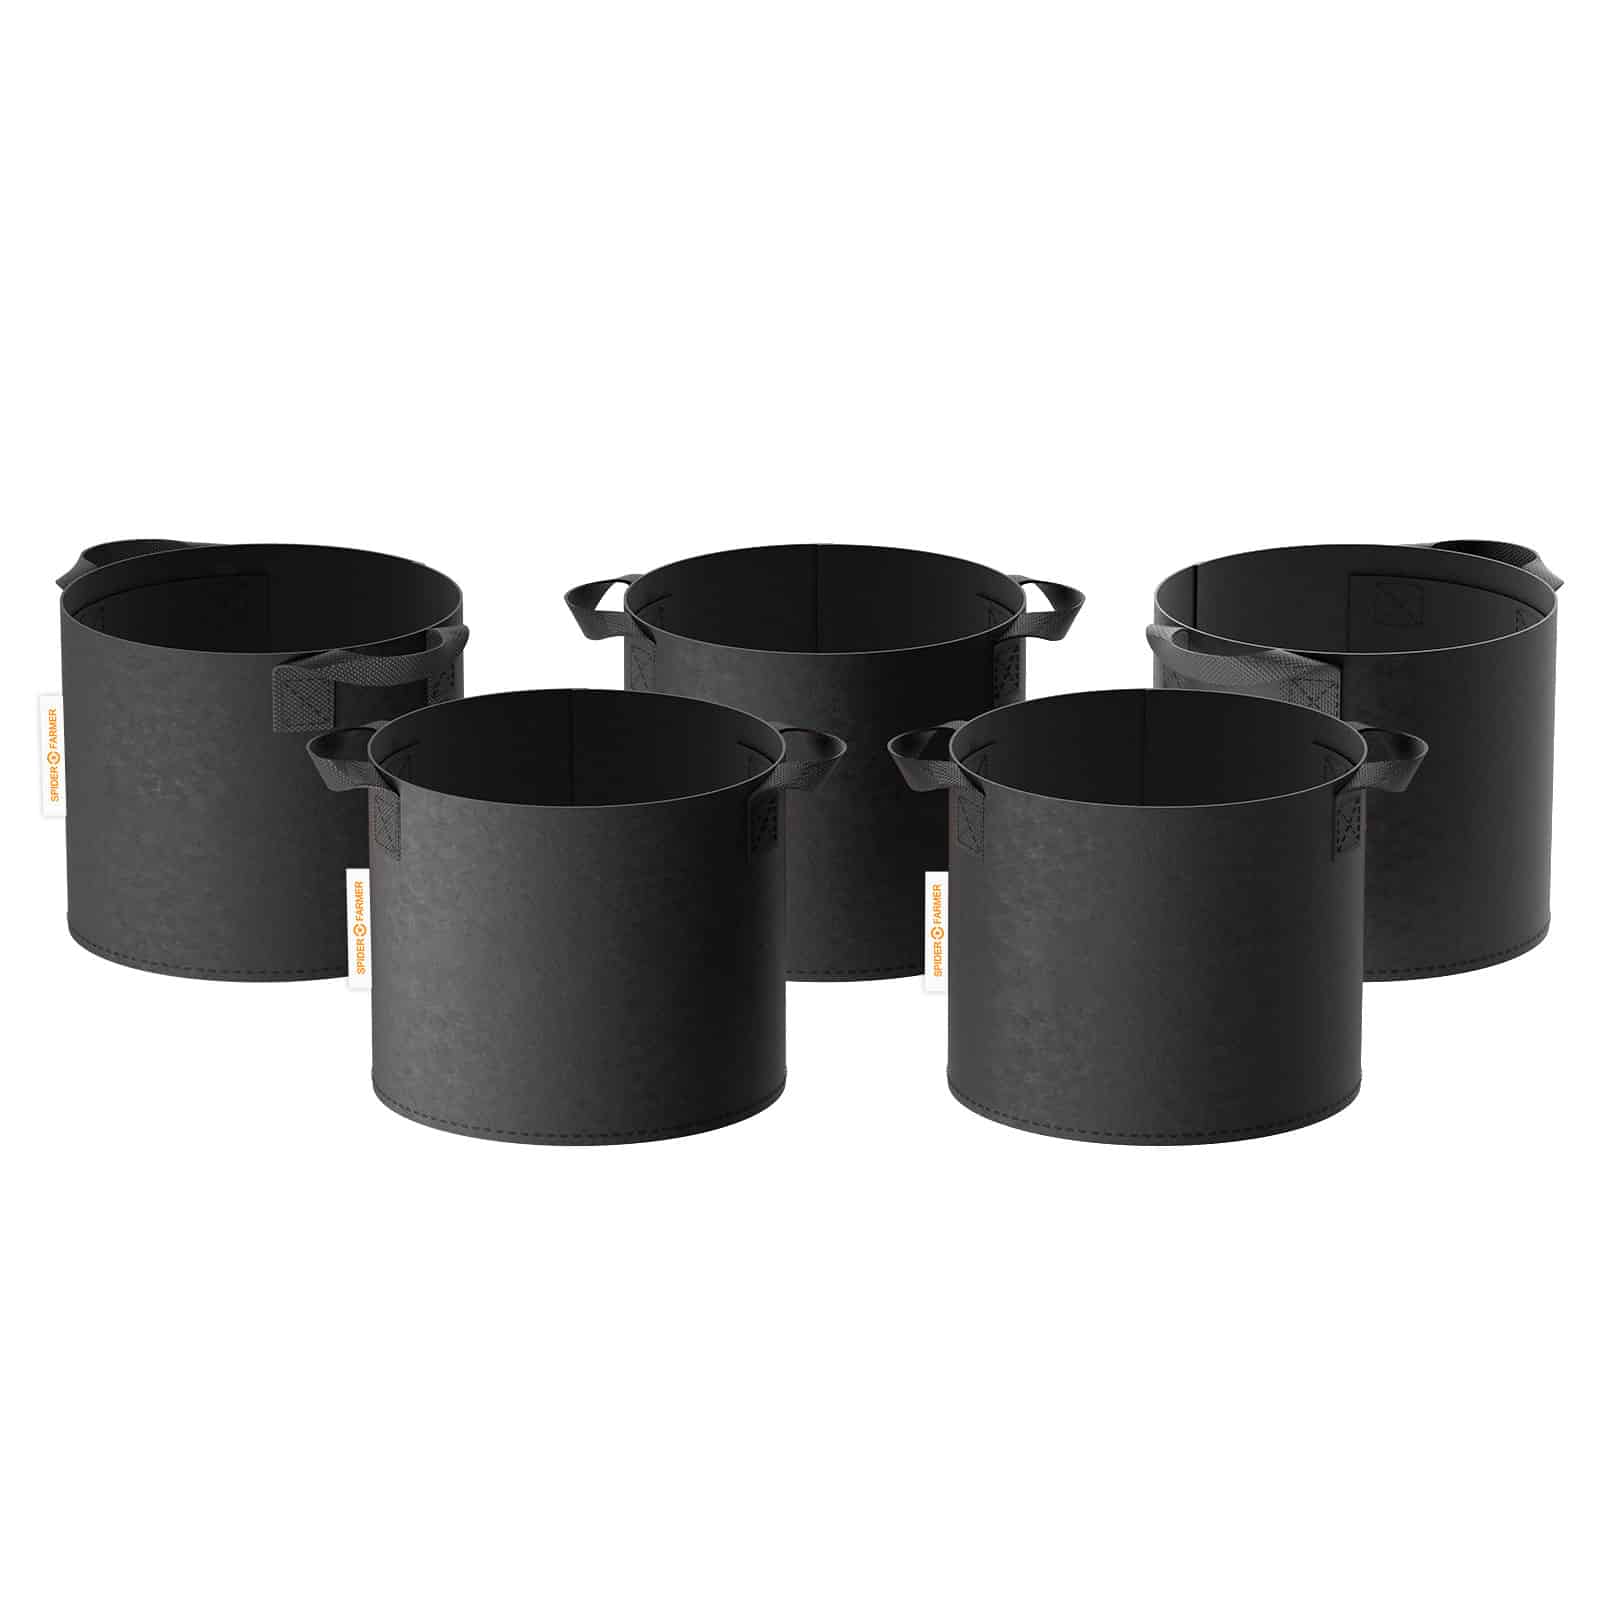 Product Image:Spider Farmer 5-pack 11 gallon grow bags Heavy Duty Fabric Pots with Handles